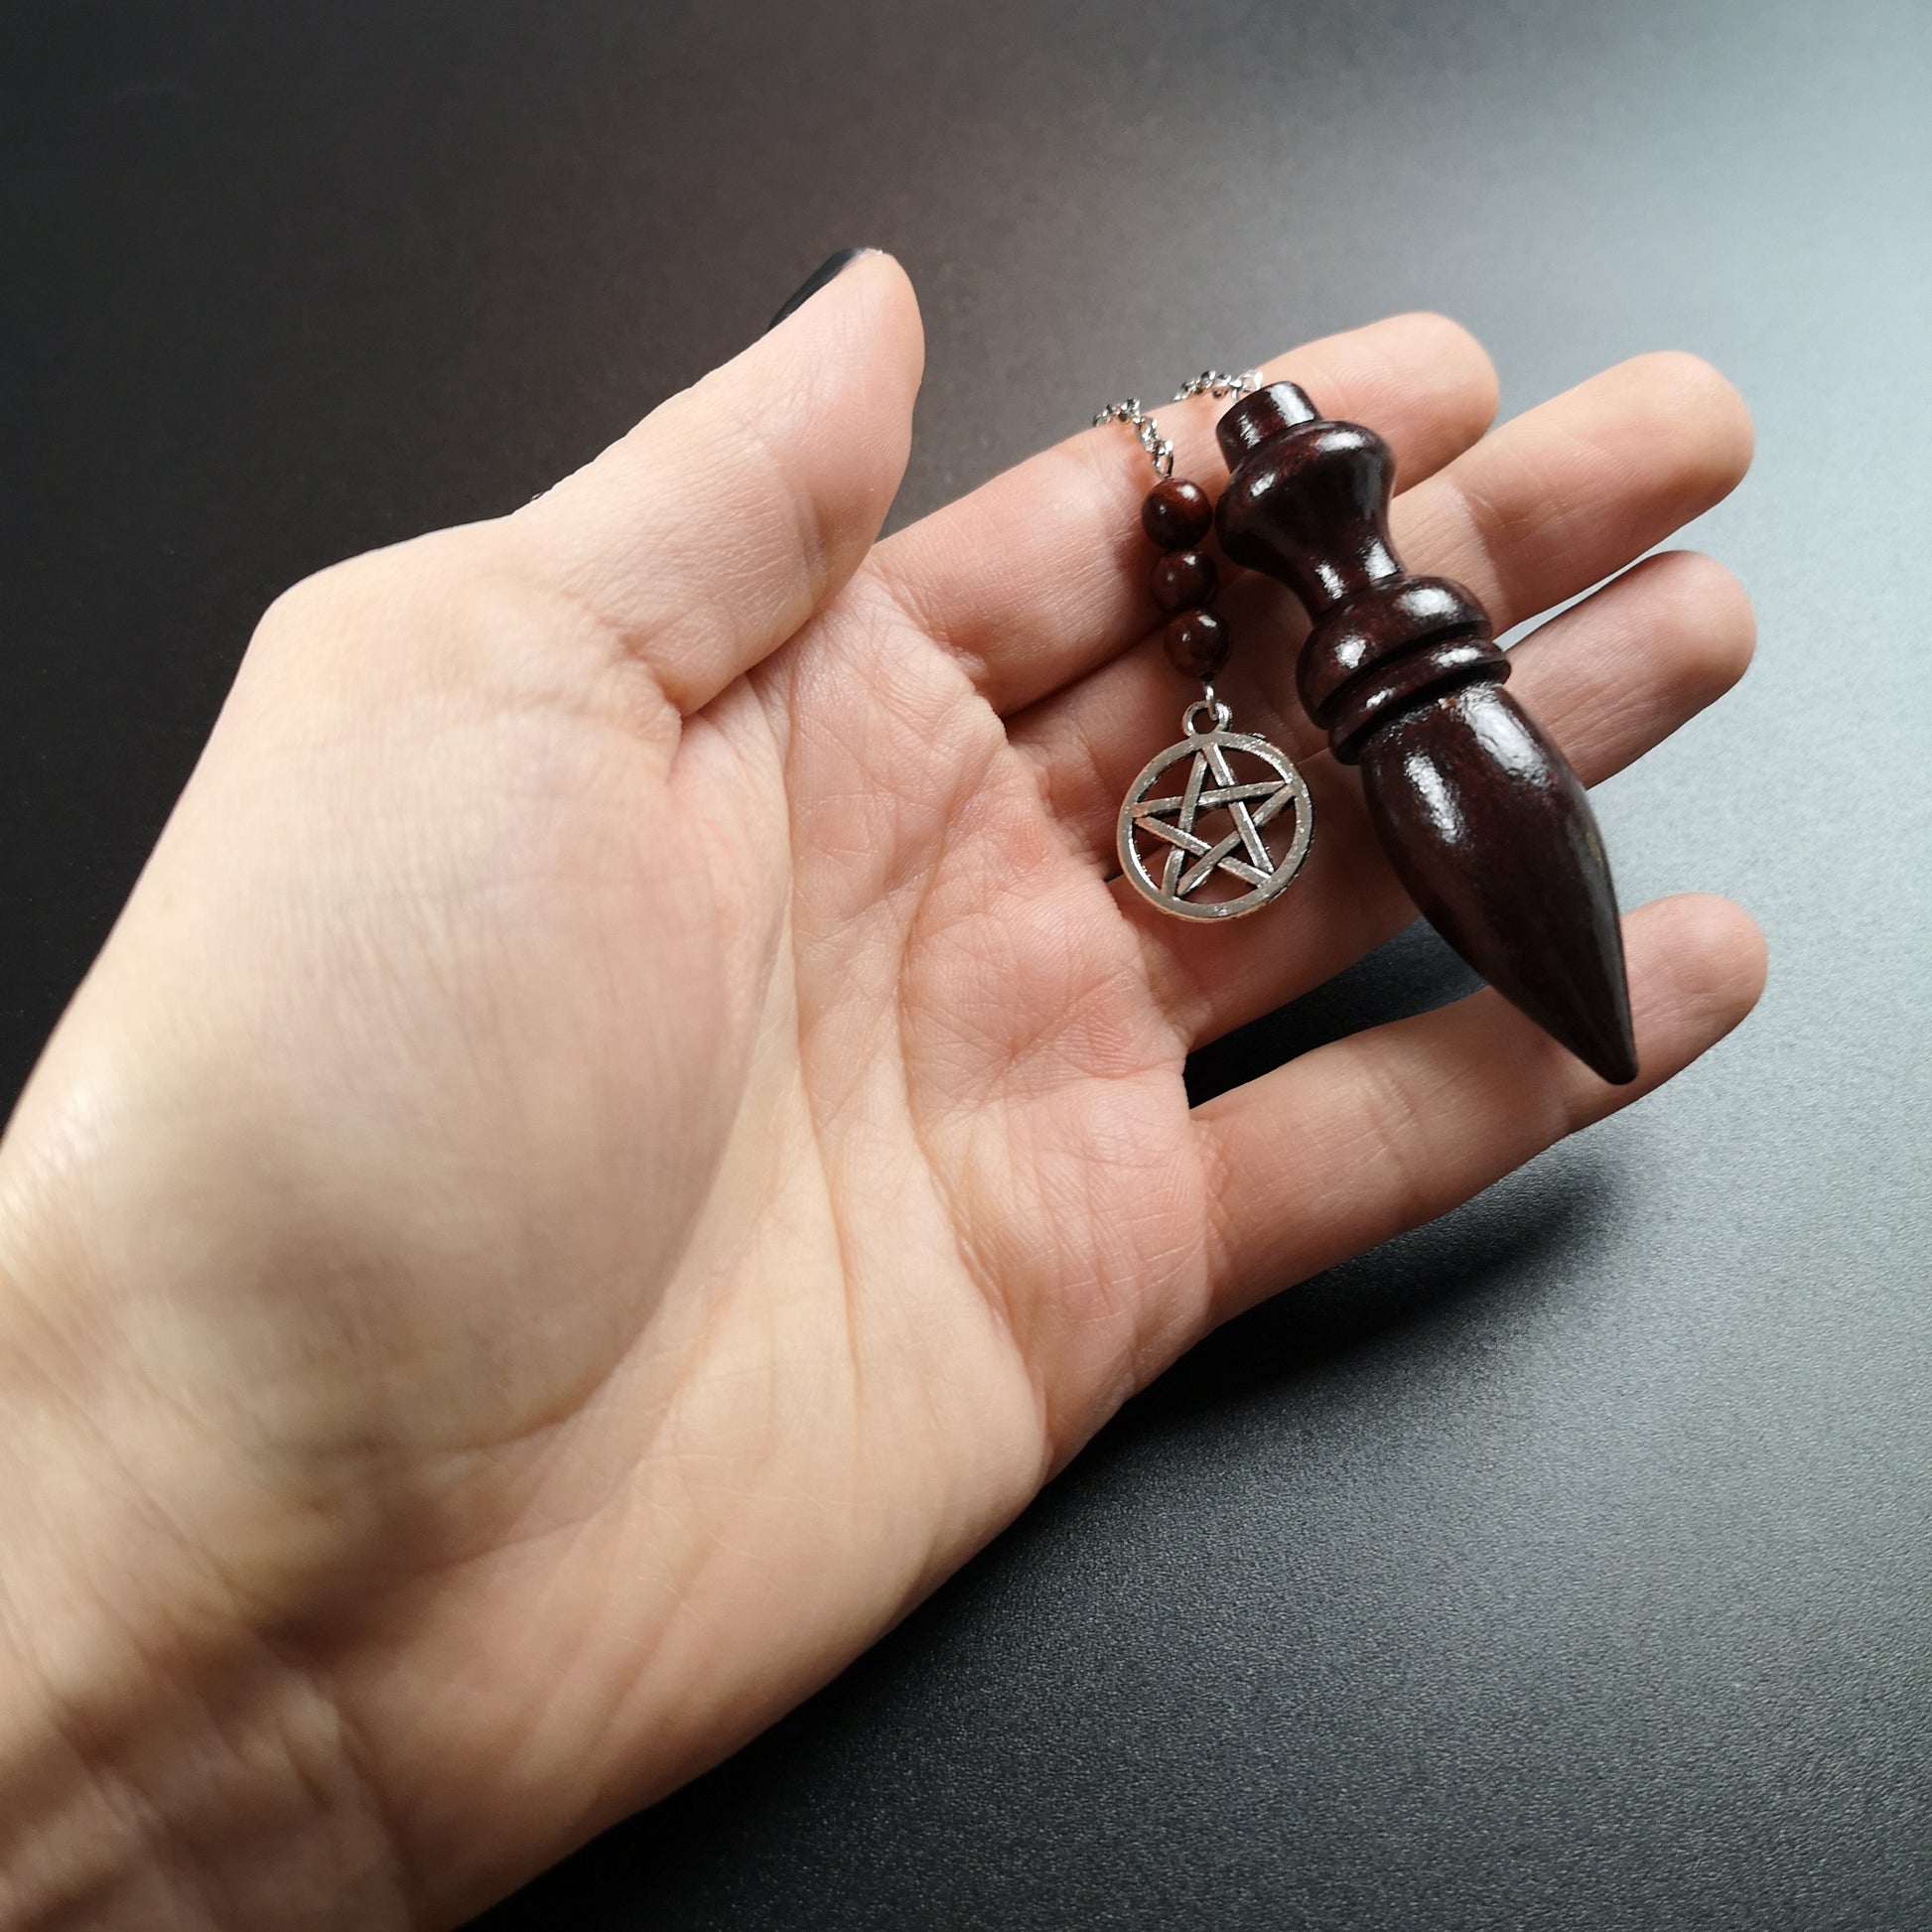 Coconut wood pentacle dowsing pendulum for divination - The French Witch shop